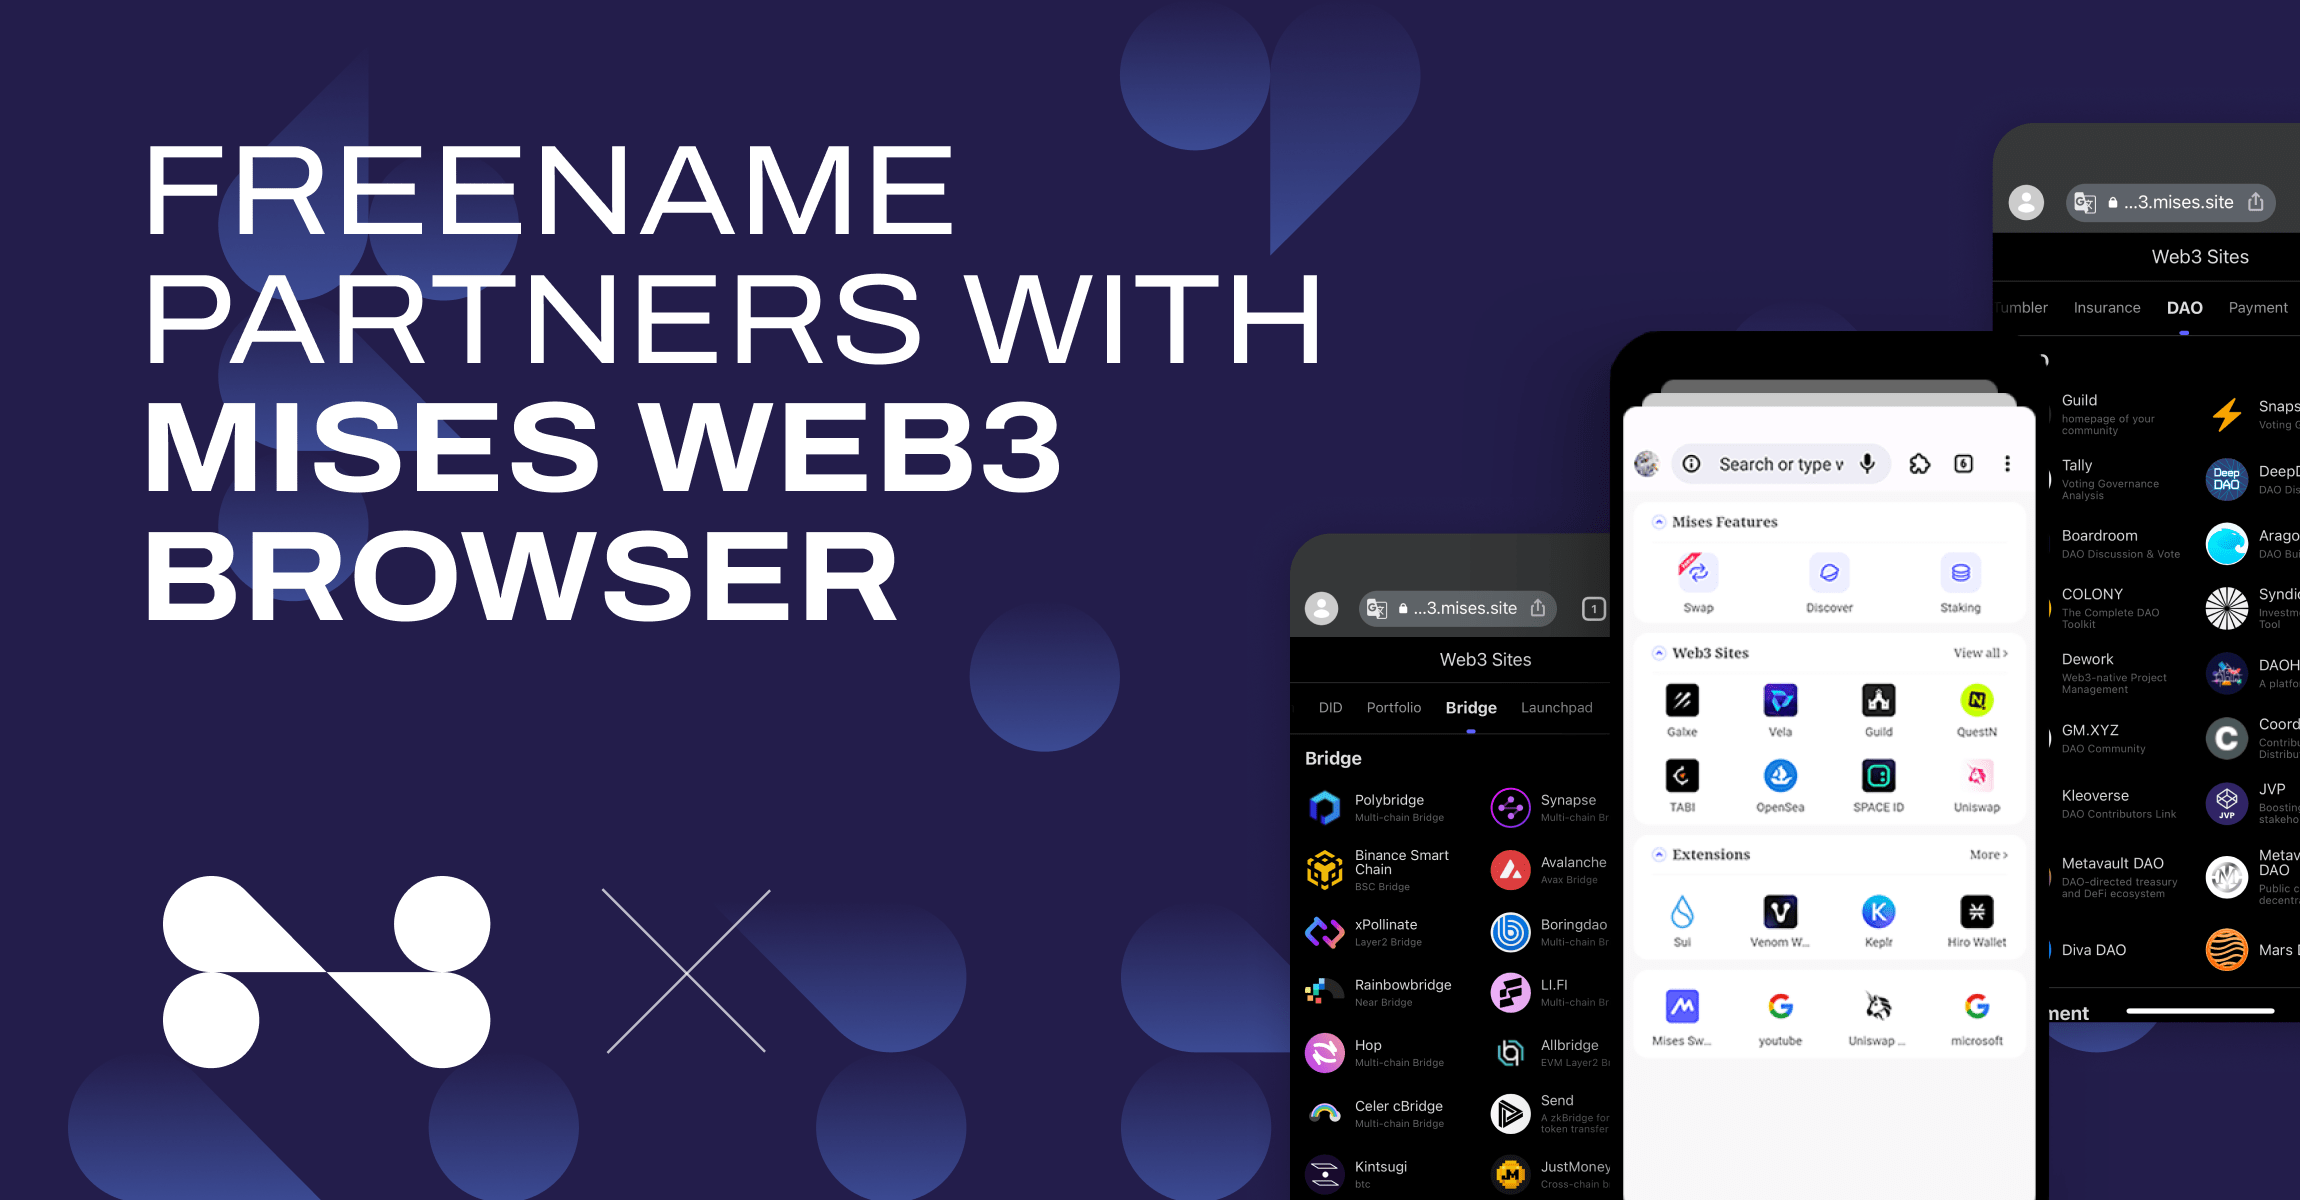 Freename Partners with Mises Web3 Browser